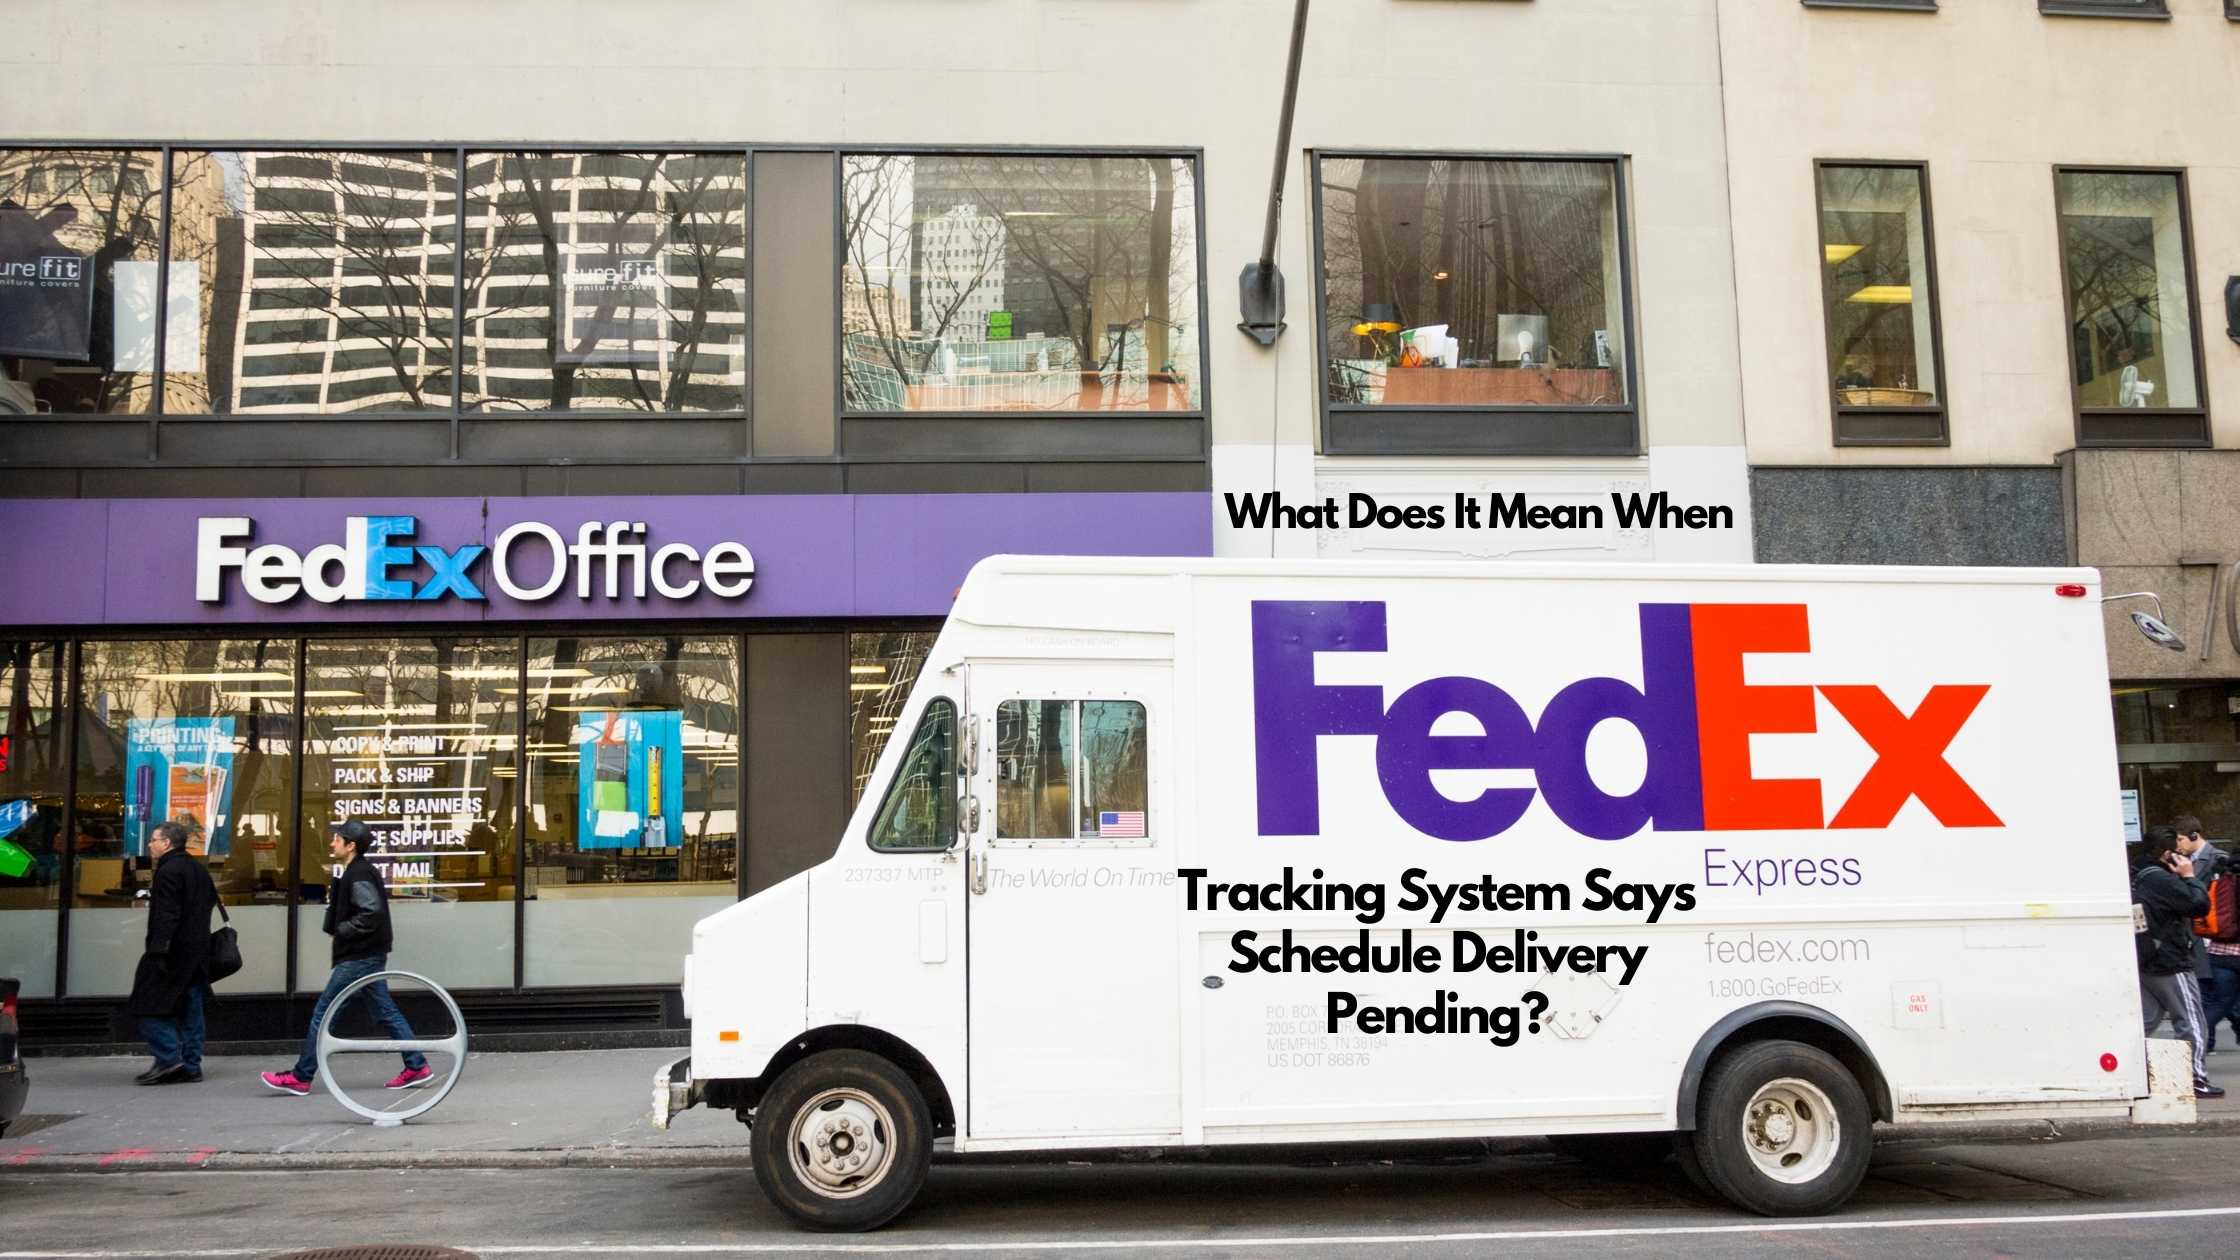 What Does it Mean when FedEx Tracking System Says Schedule Delivery Pending